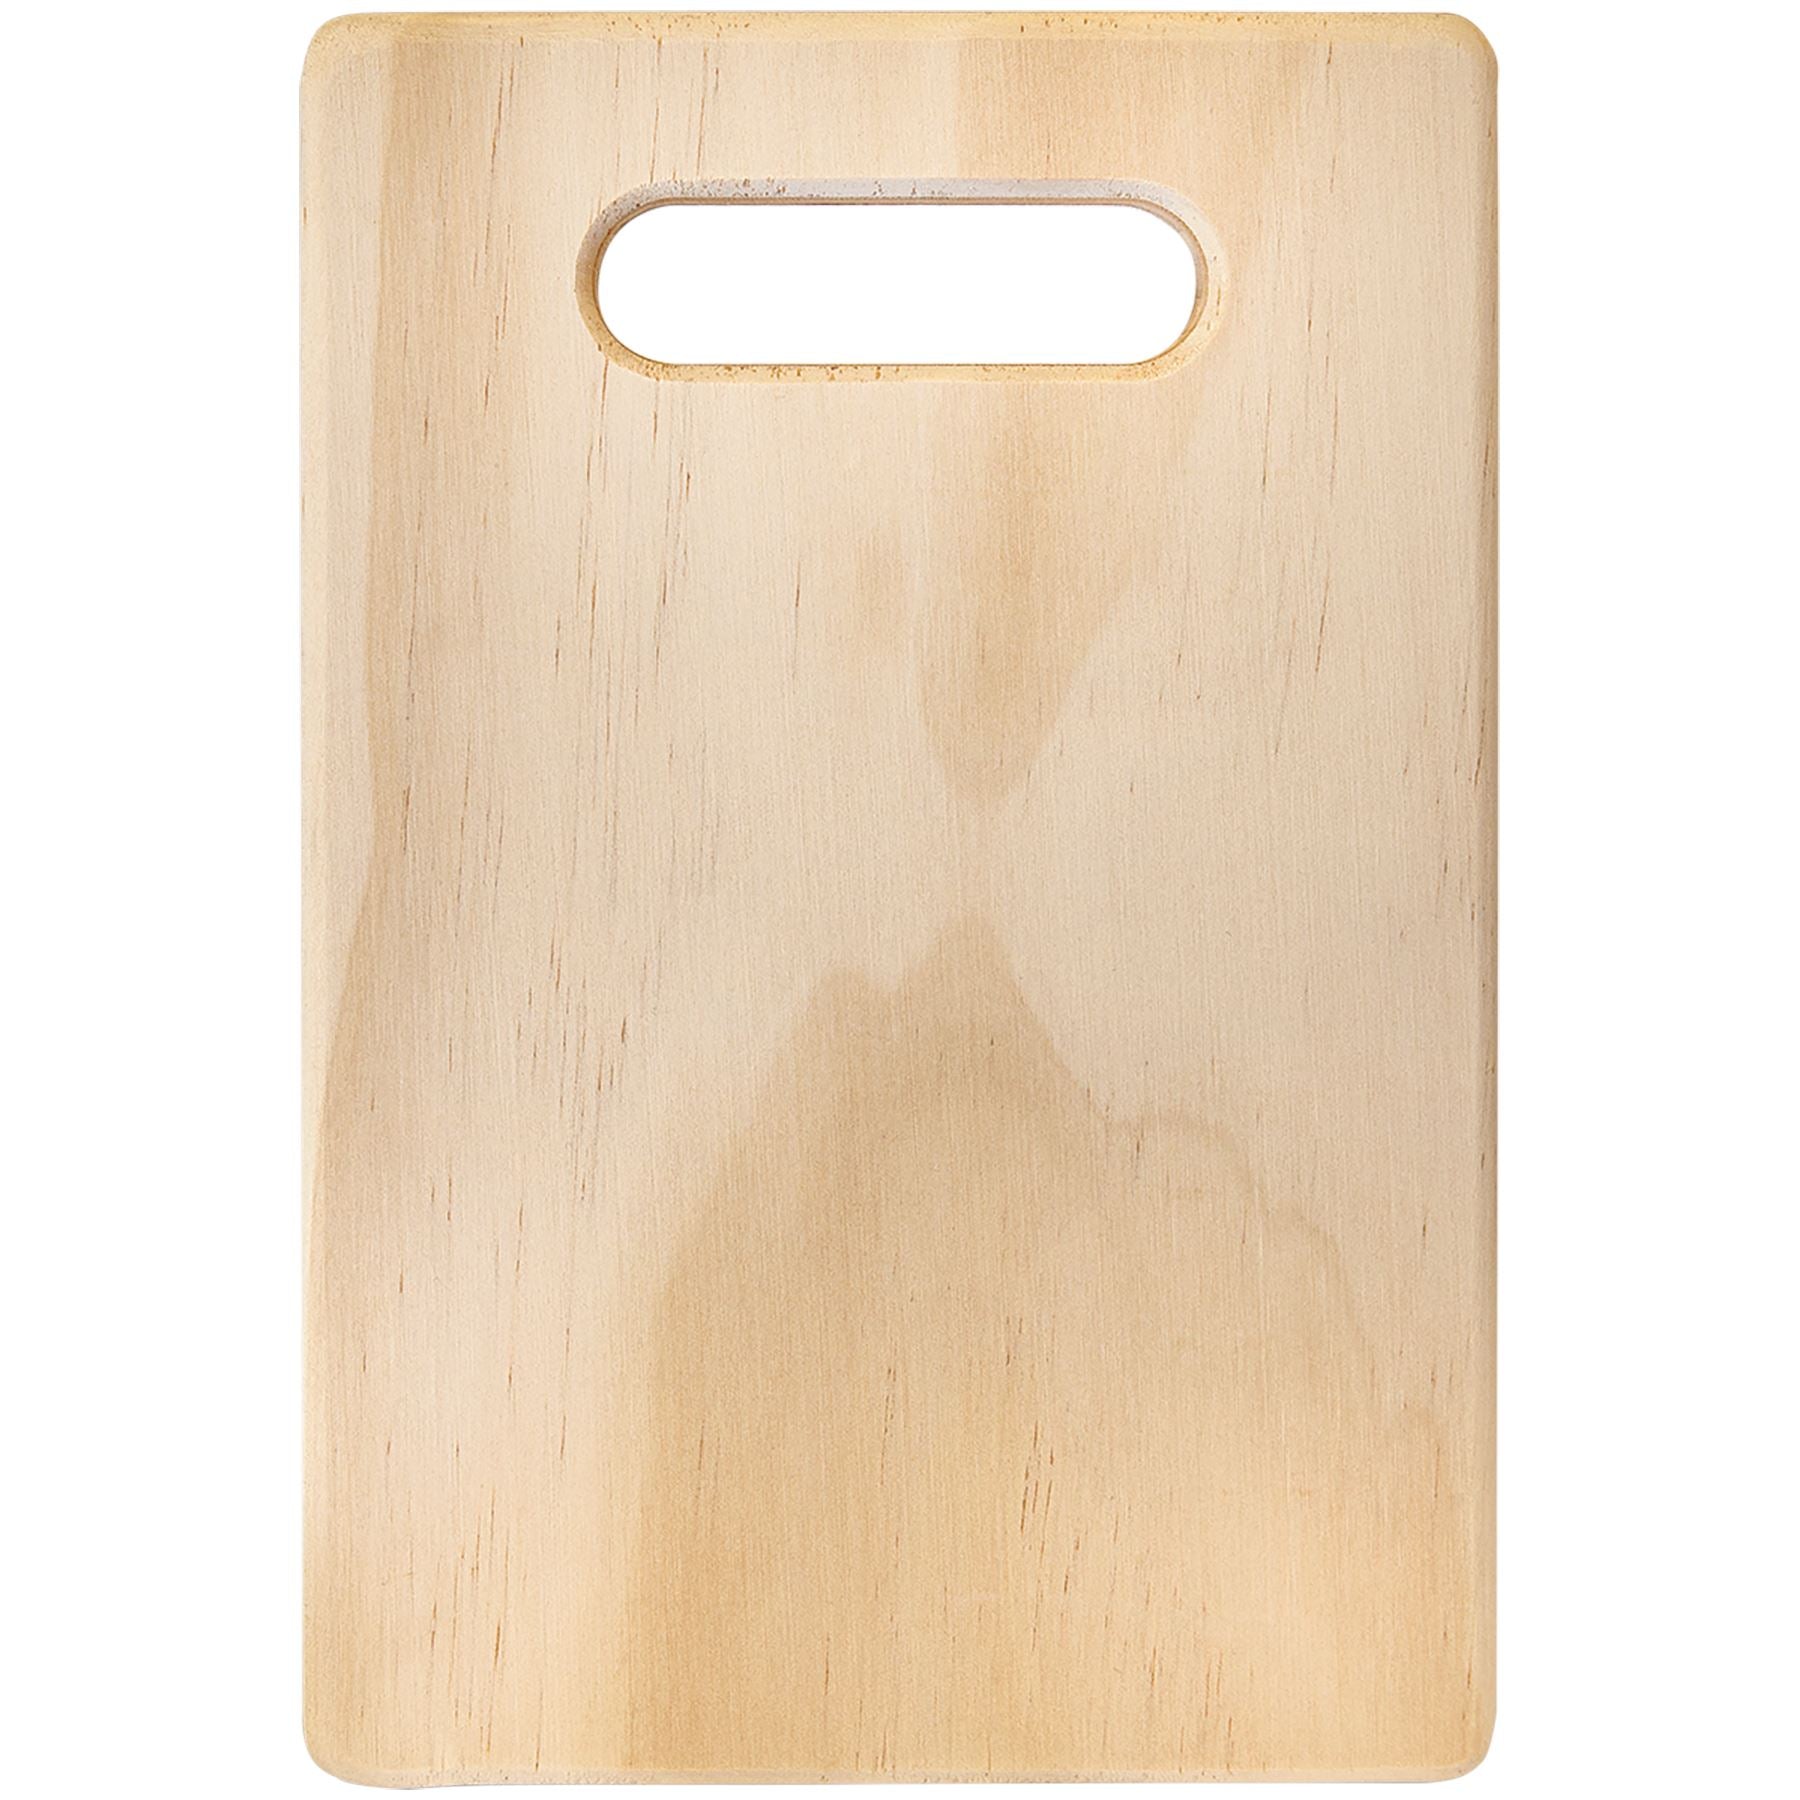 Full Color Rectangle Wood Cutting Board 9" x 6", Full Color Sub Dye/Laser Engraved Cutting Board Craftworks NW 